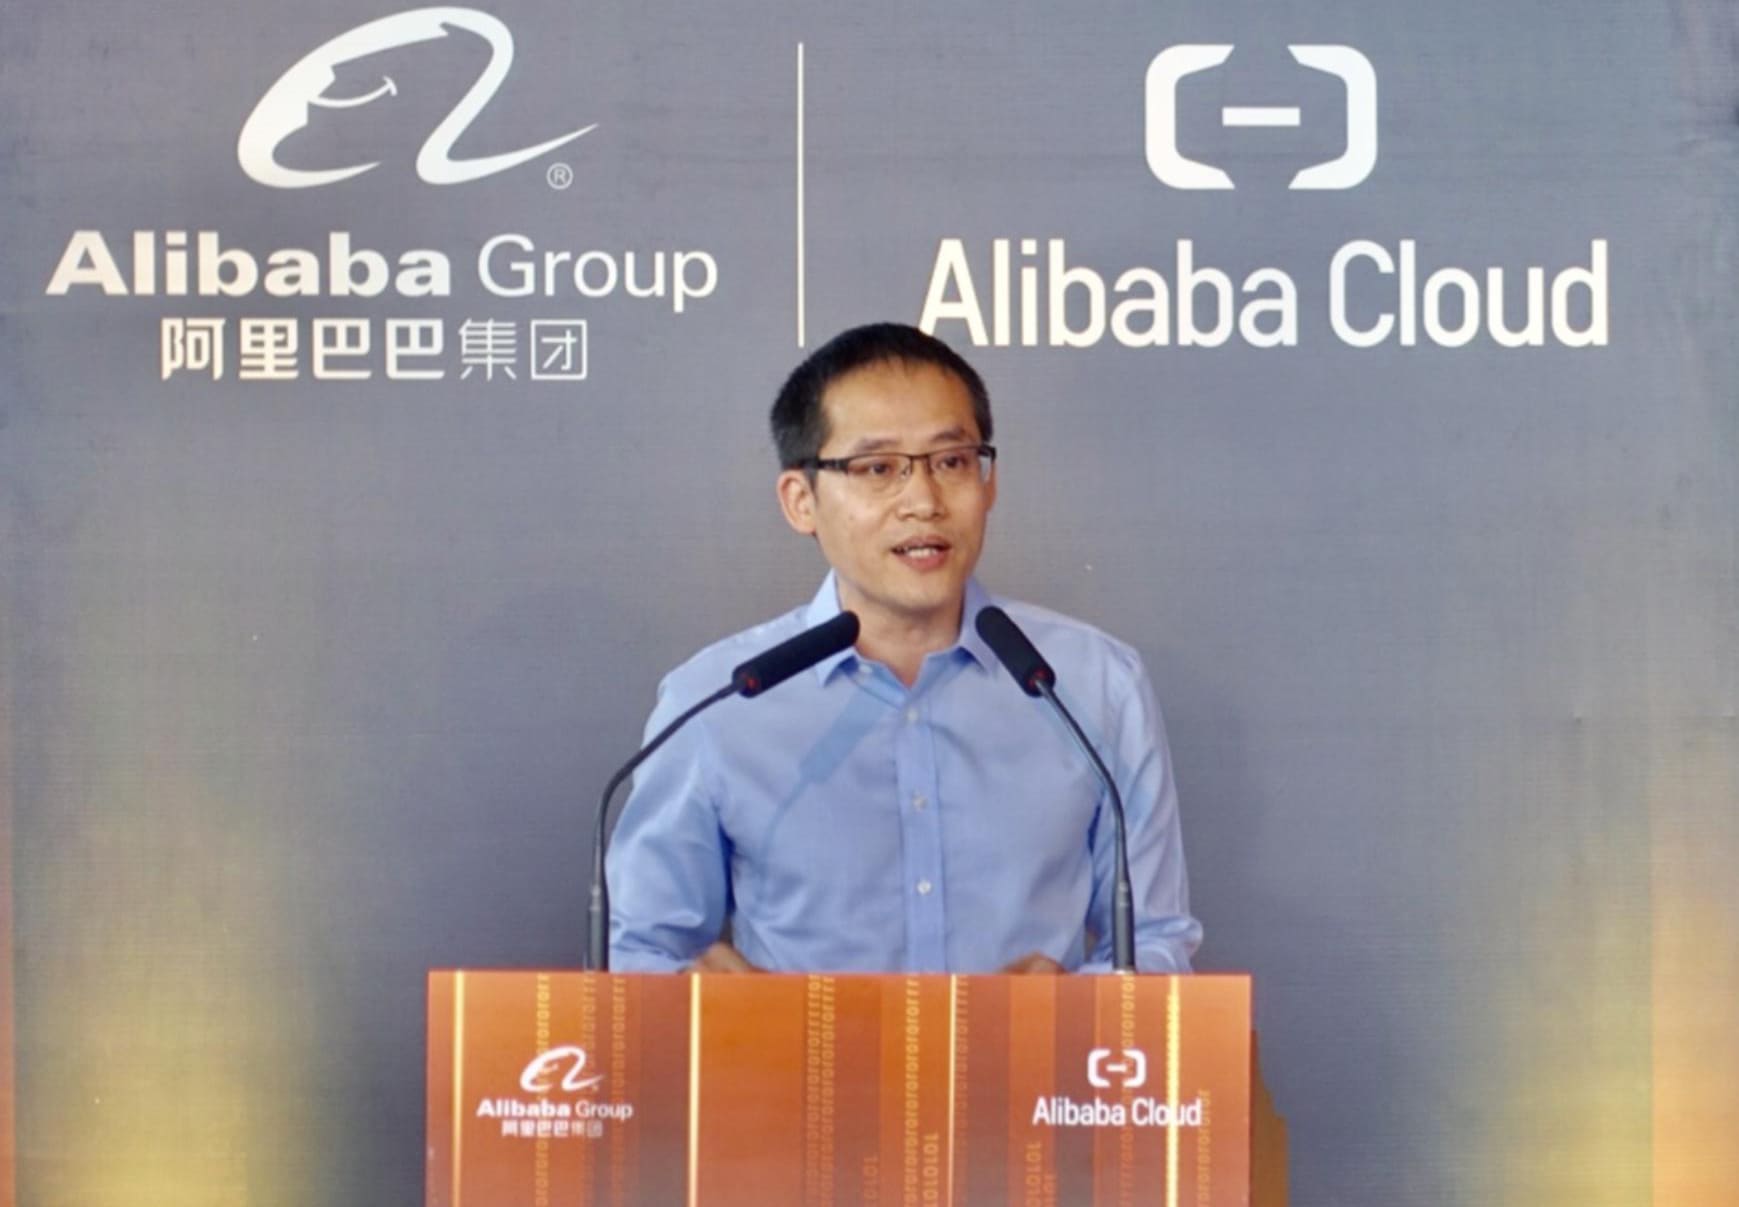 Alibaba (BABA) earnings Q3 2021 Cloud profitable for the first time